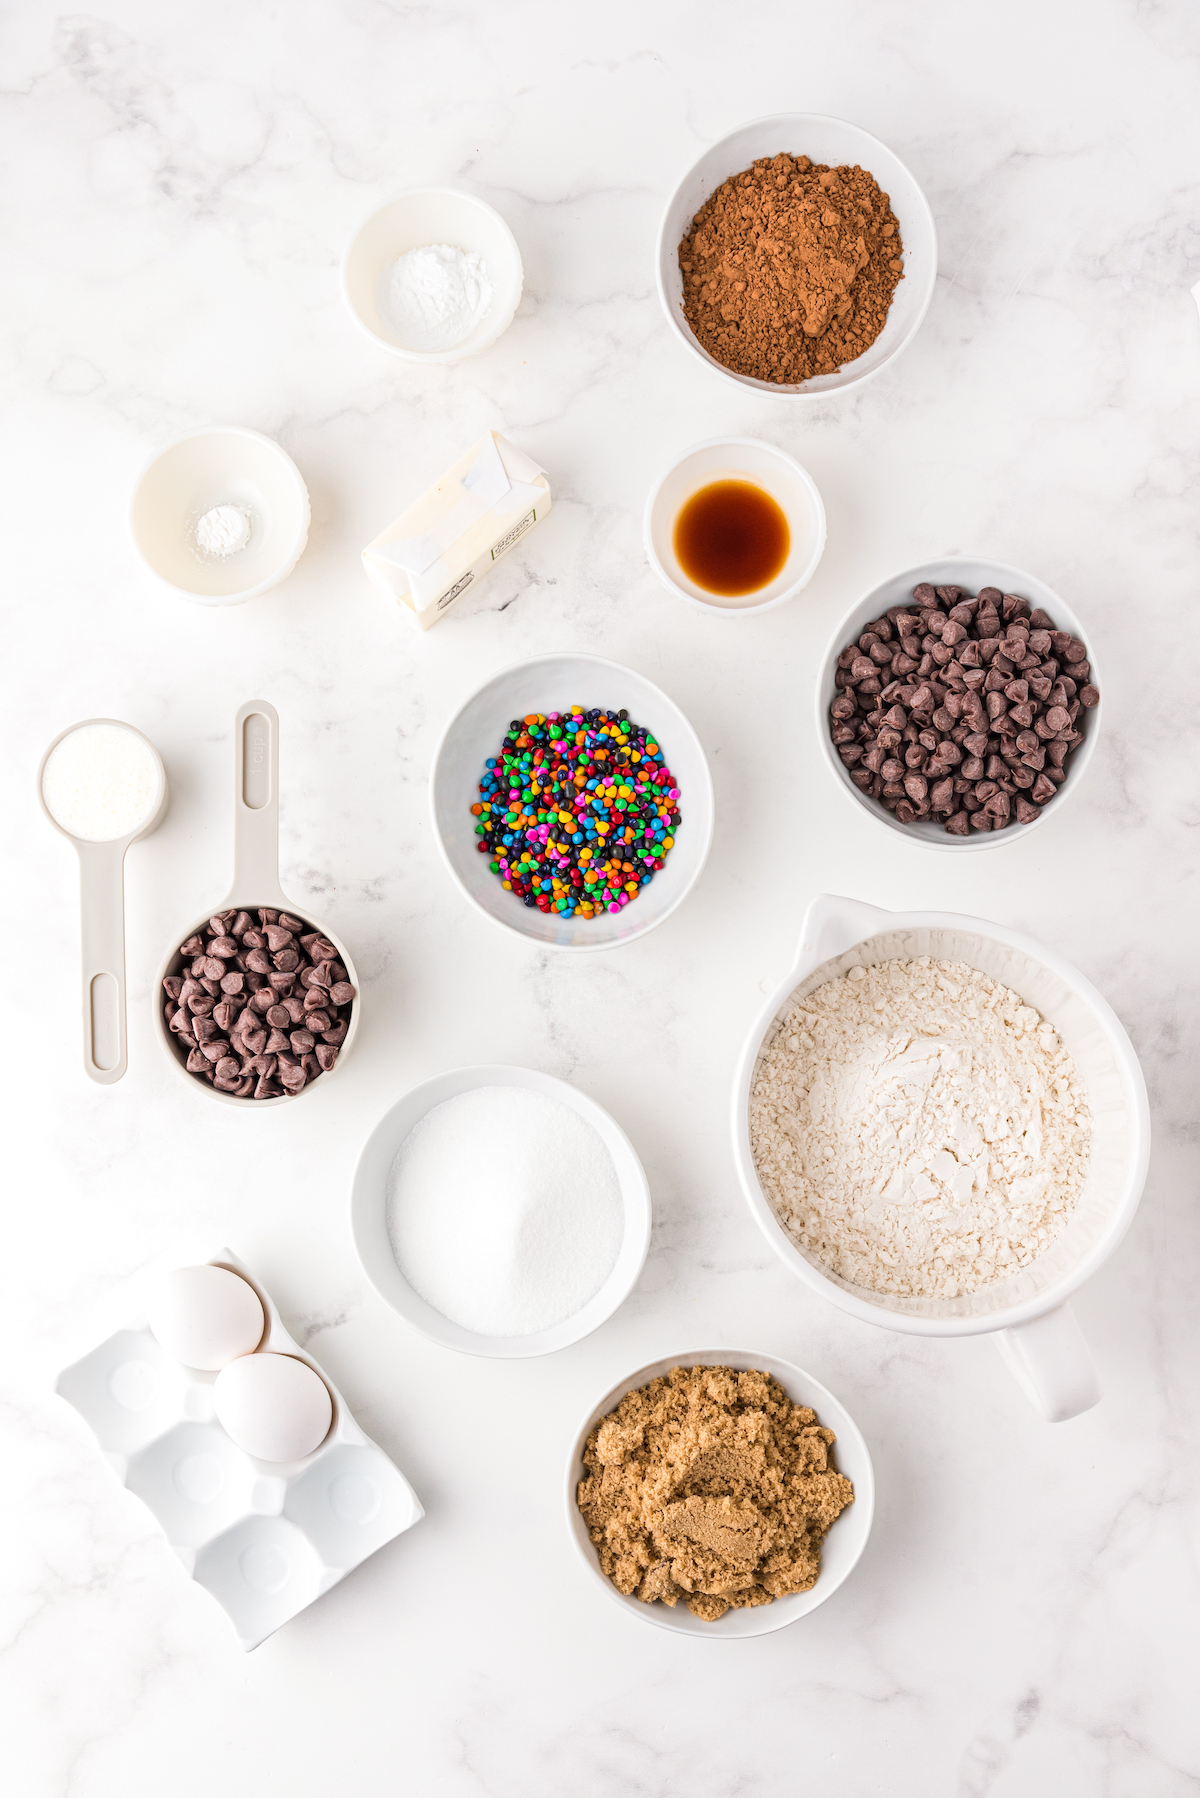 The ingredients for a cosmic brownie crumbl cookie recipe, measured into small dishes.